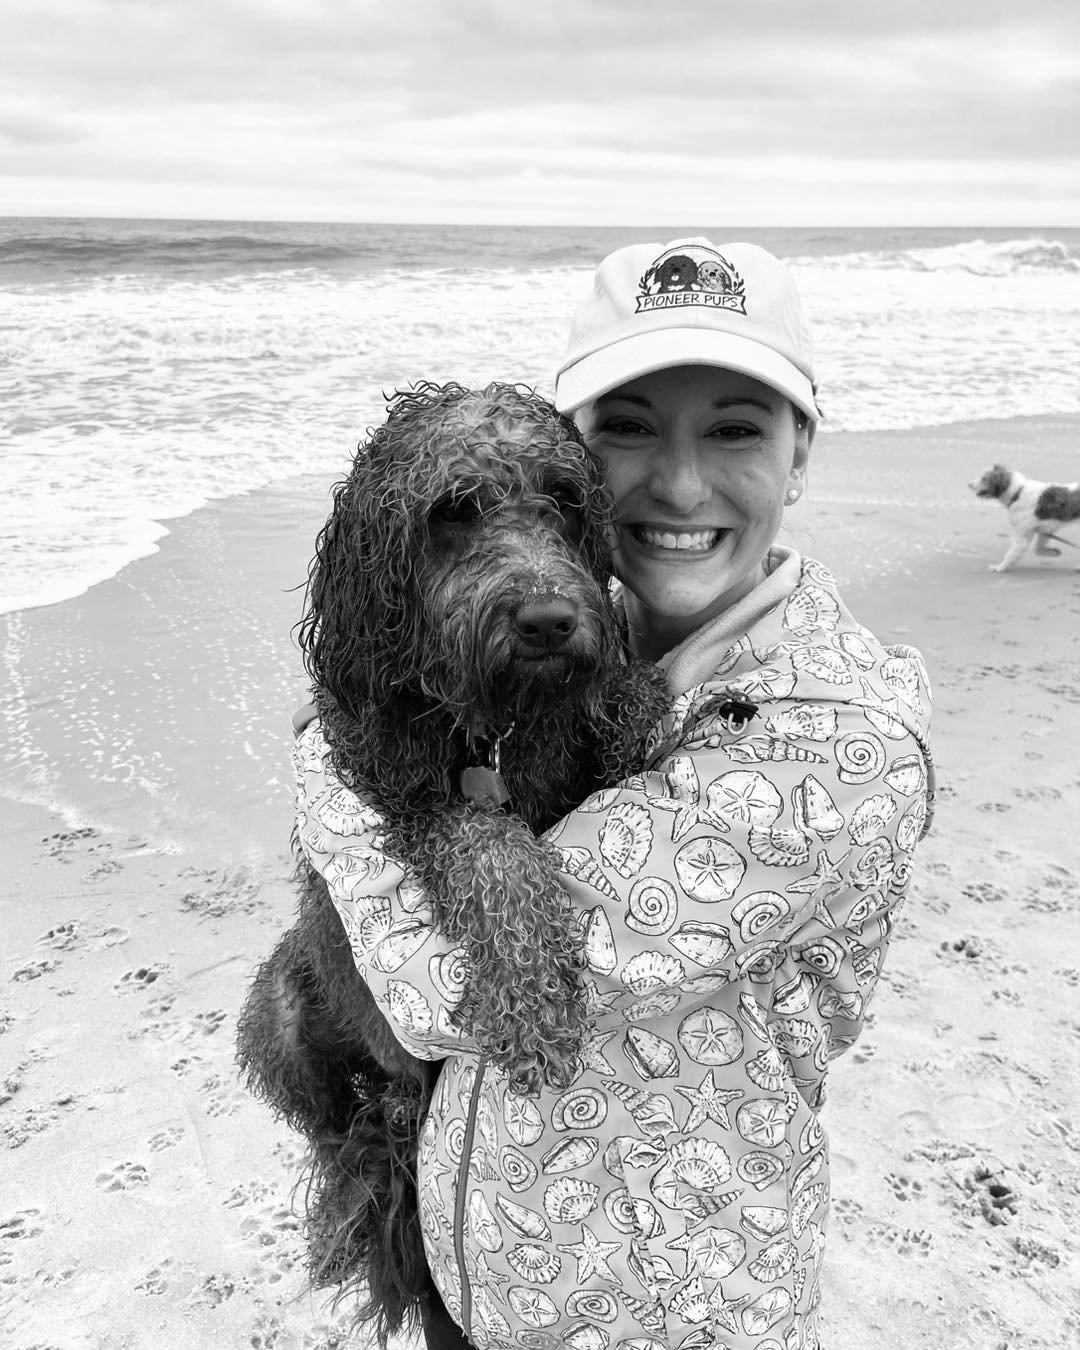 Gearing up for Doodles in Dewey weekend, tomorrow at 10am on Dewey Beach! Stop on by our tent to say hello &amp; pick up some nourishing goodies for your pup! You might even be able to spot Teddy &amp; Paddington 🐶 Can&rsquo;t wait to see you!
&bull